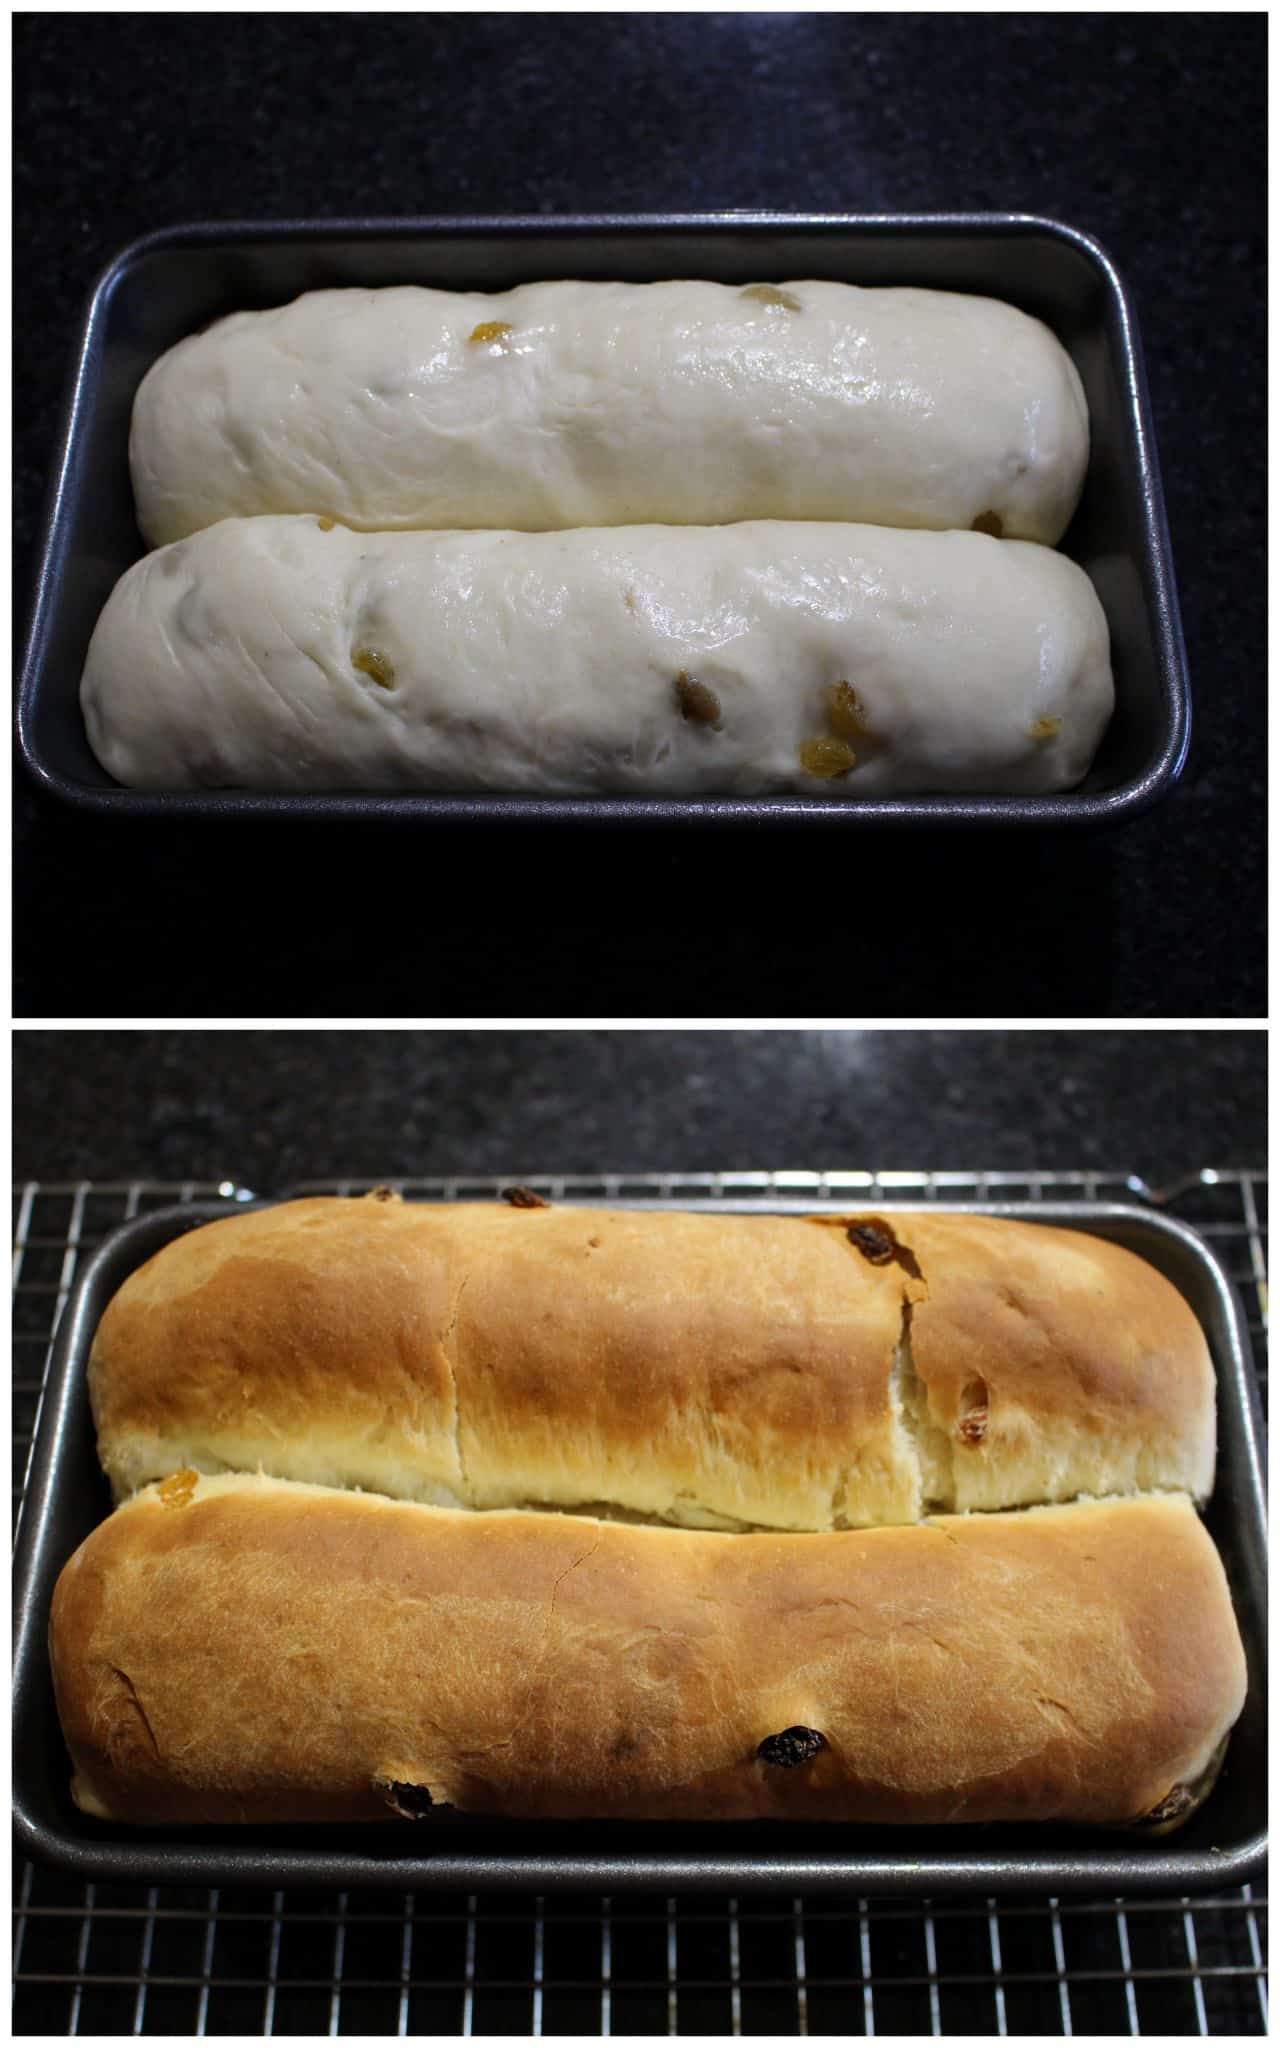 Bake the roll in oven